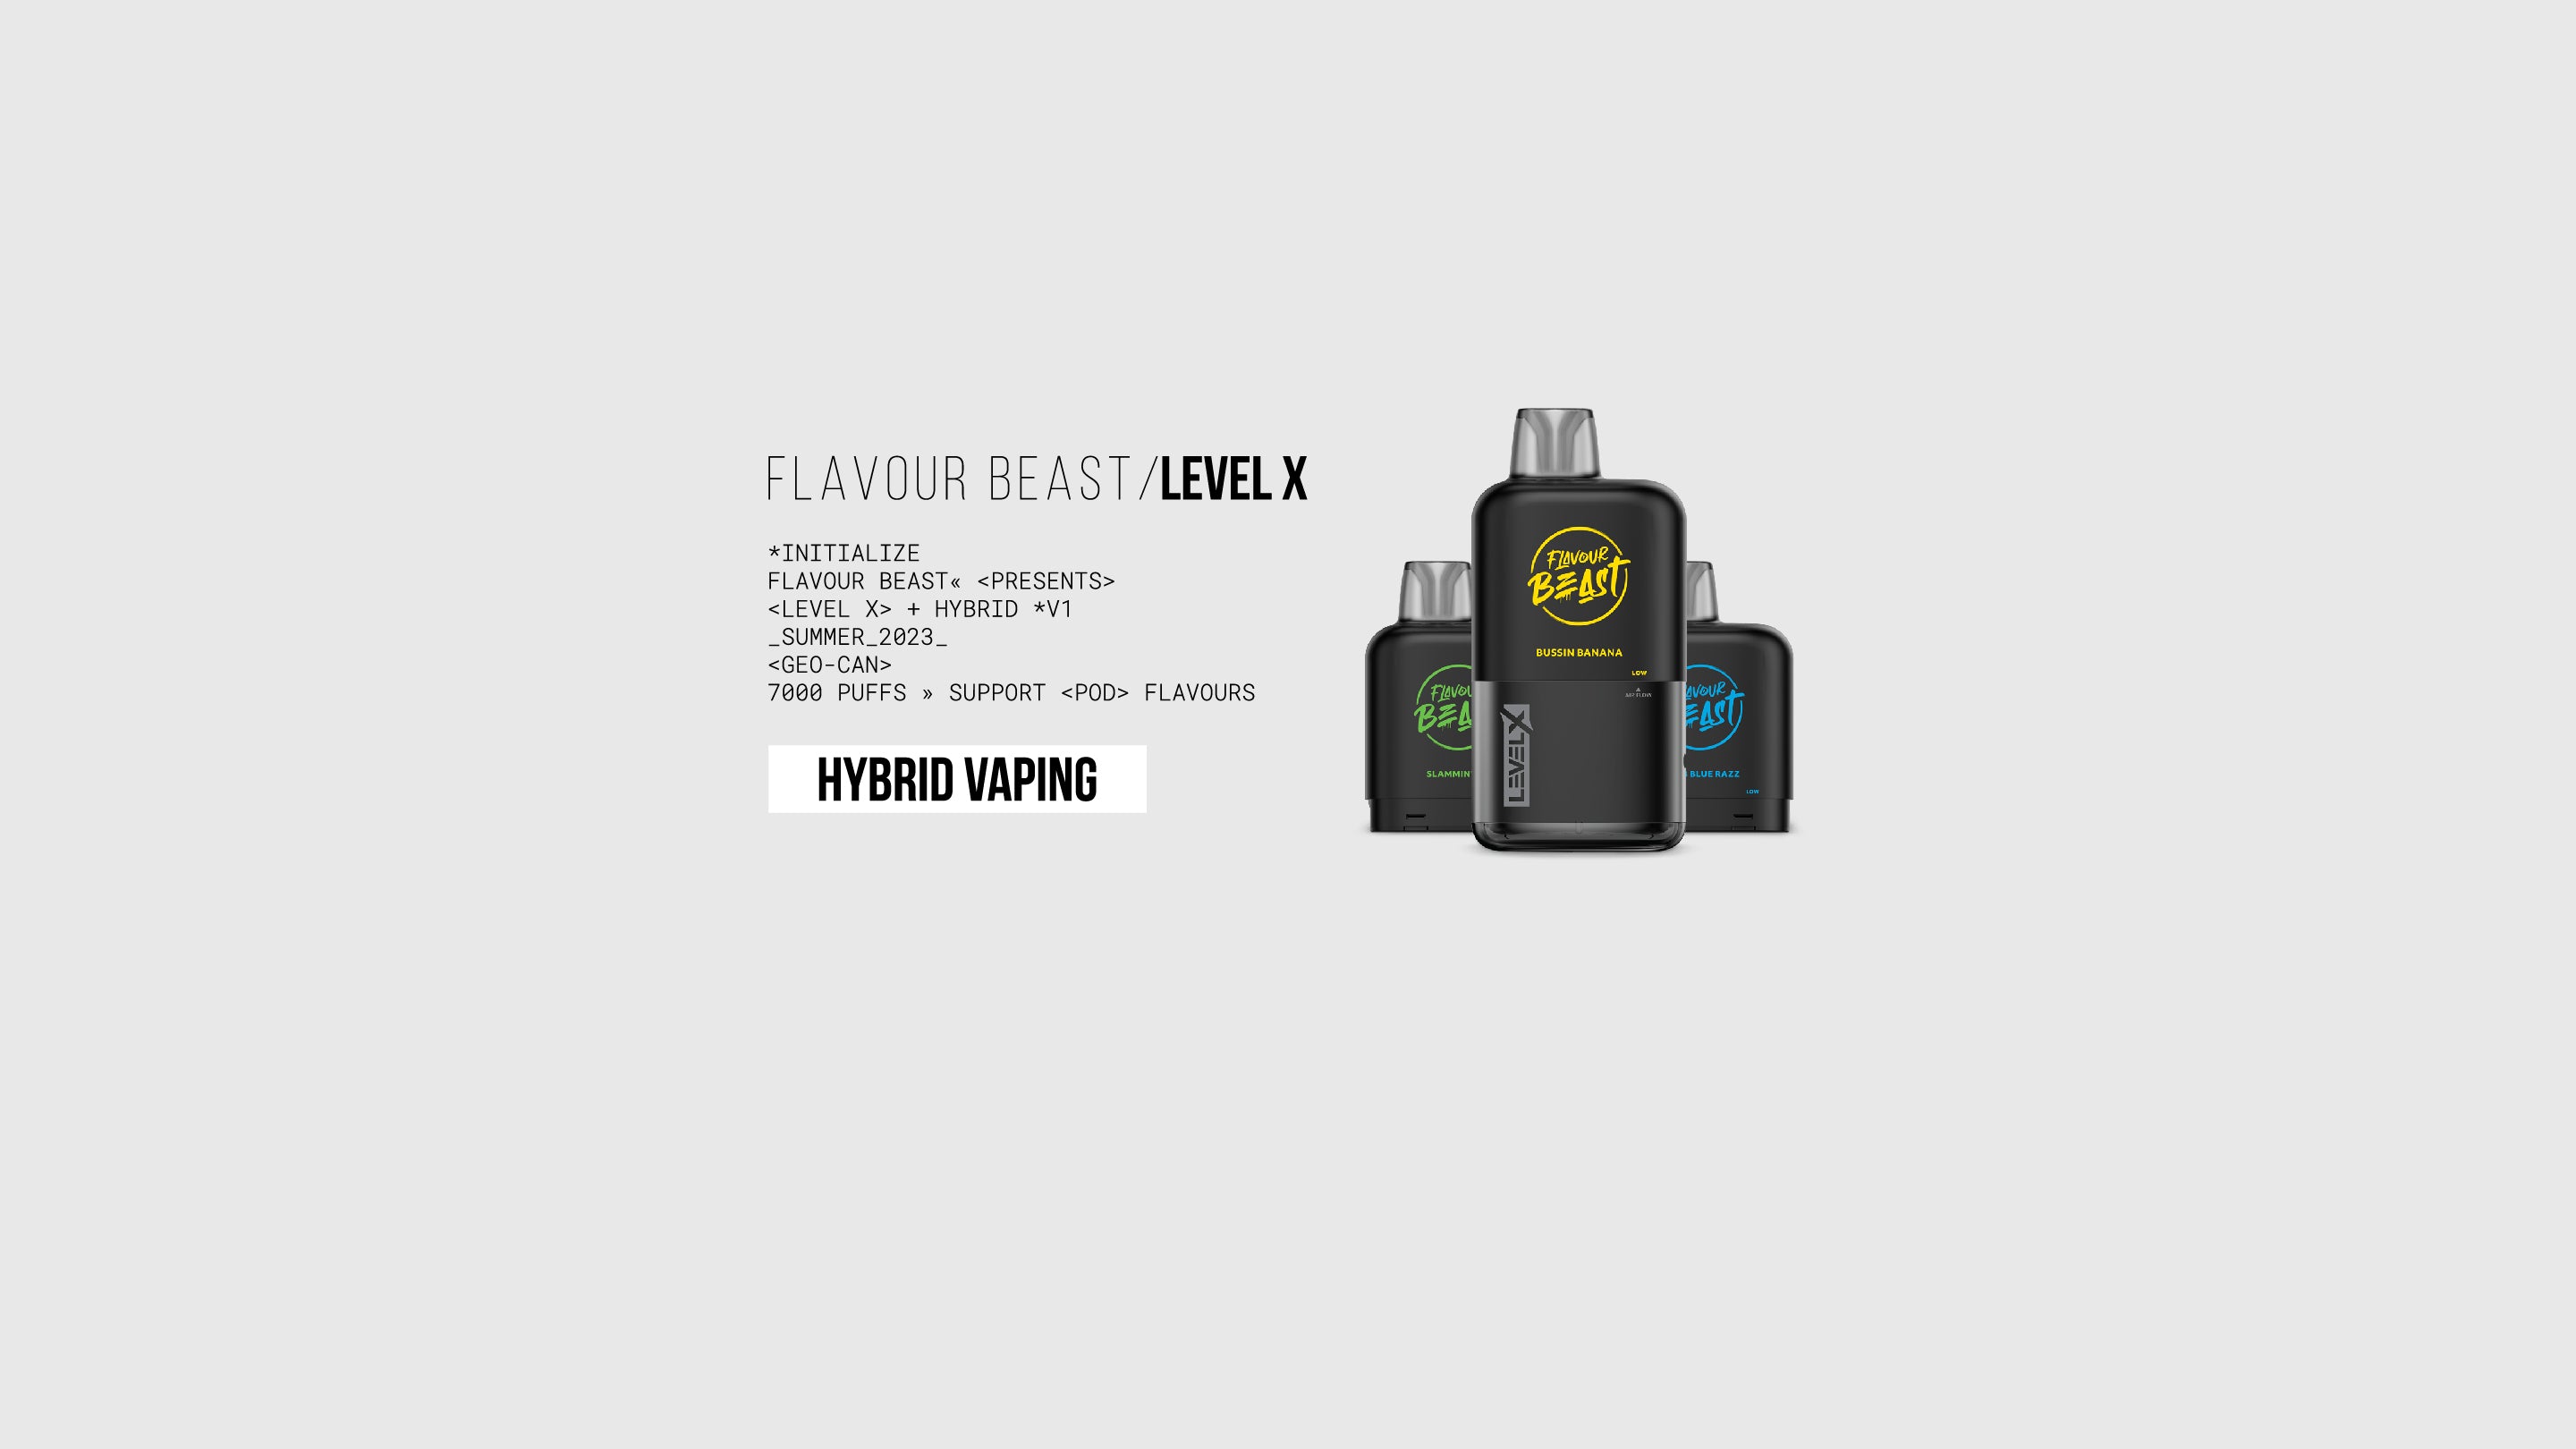 Flavour Beast Level X Pods, 14mL Level X, 7000 Puffs, Flavour Beast Canada